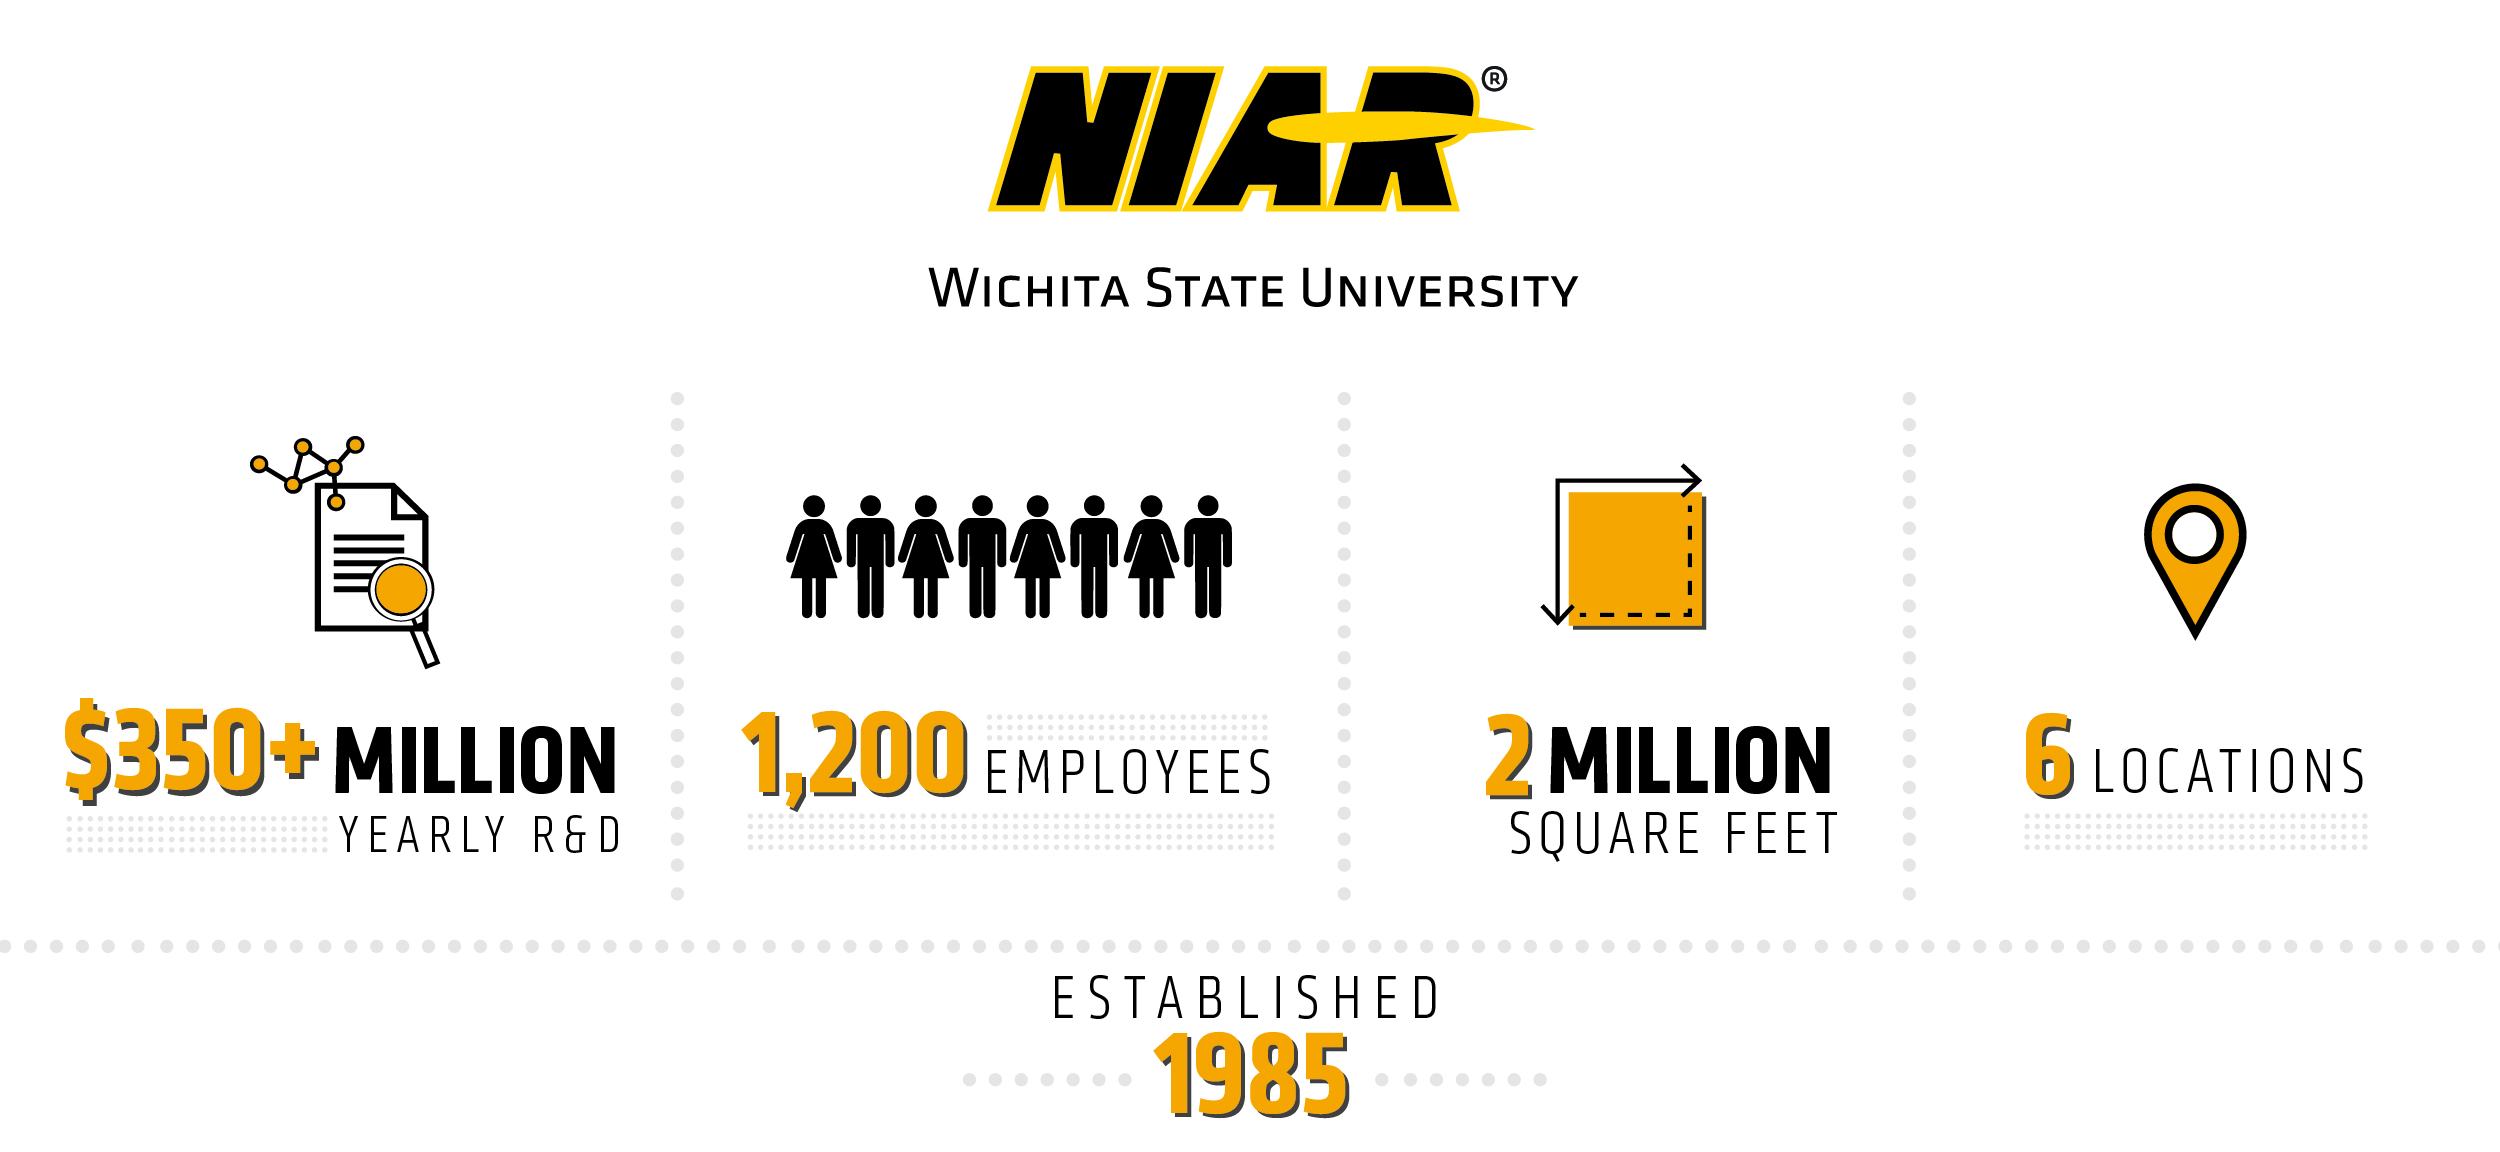 NIAR Fast Facts graphic: $240+ million yearly R&D, 1,400 employees, 2+ million square feet, 6 locations, established in 1985